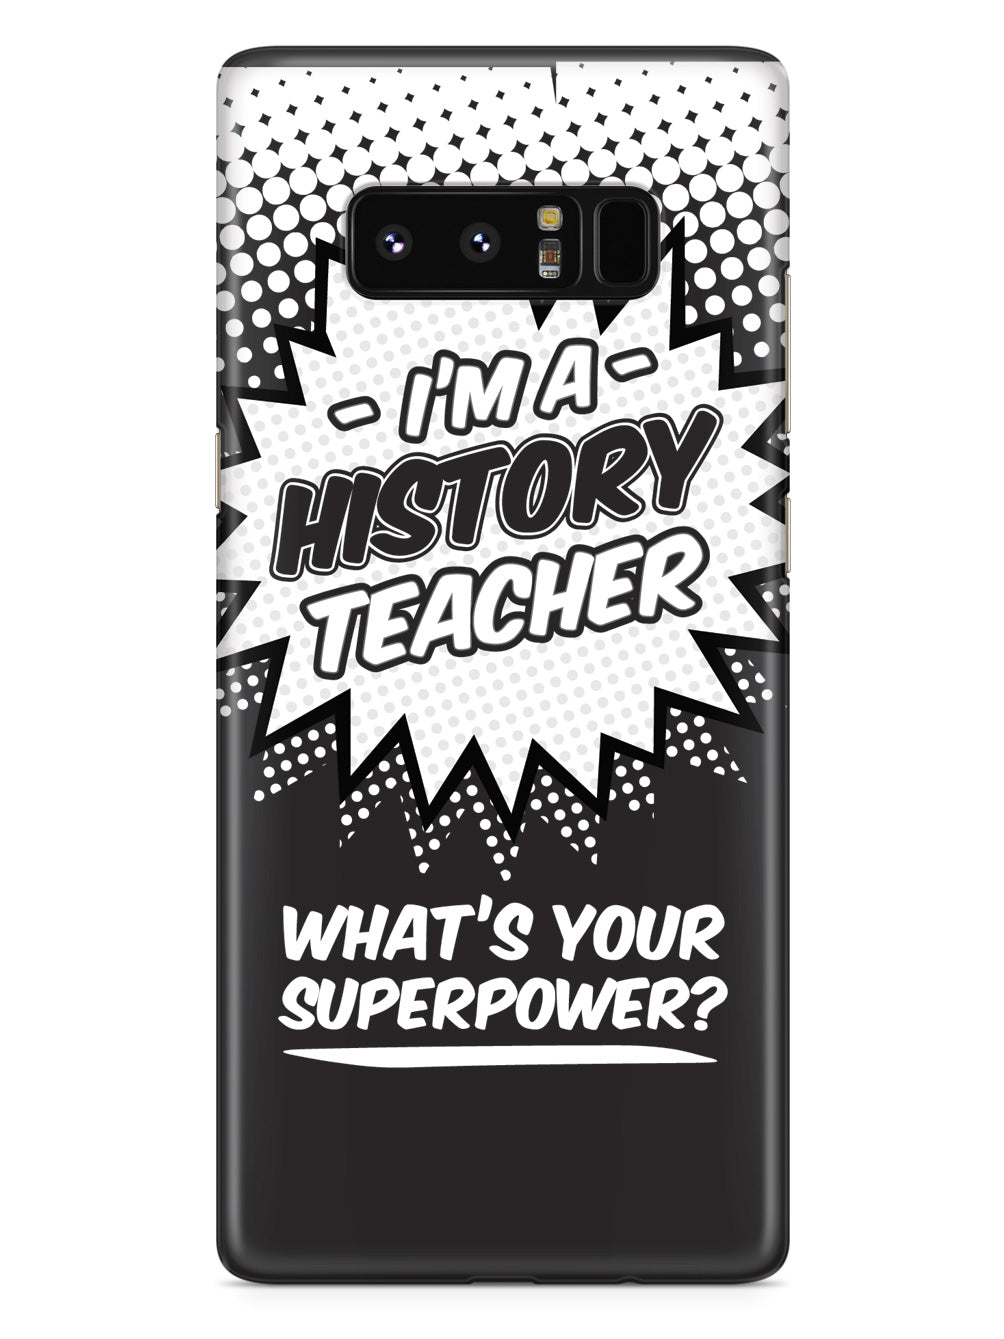 History Teacher - What's Your Superpower? Case